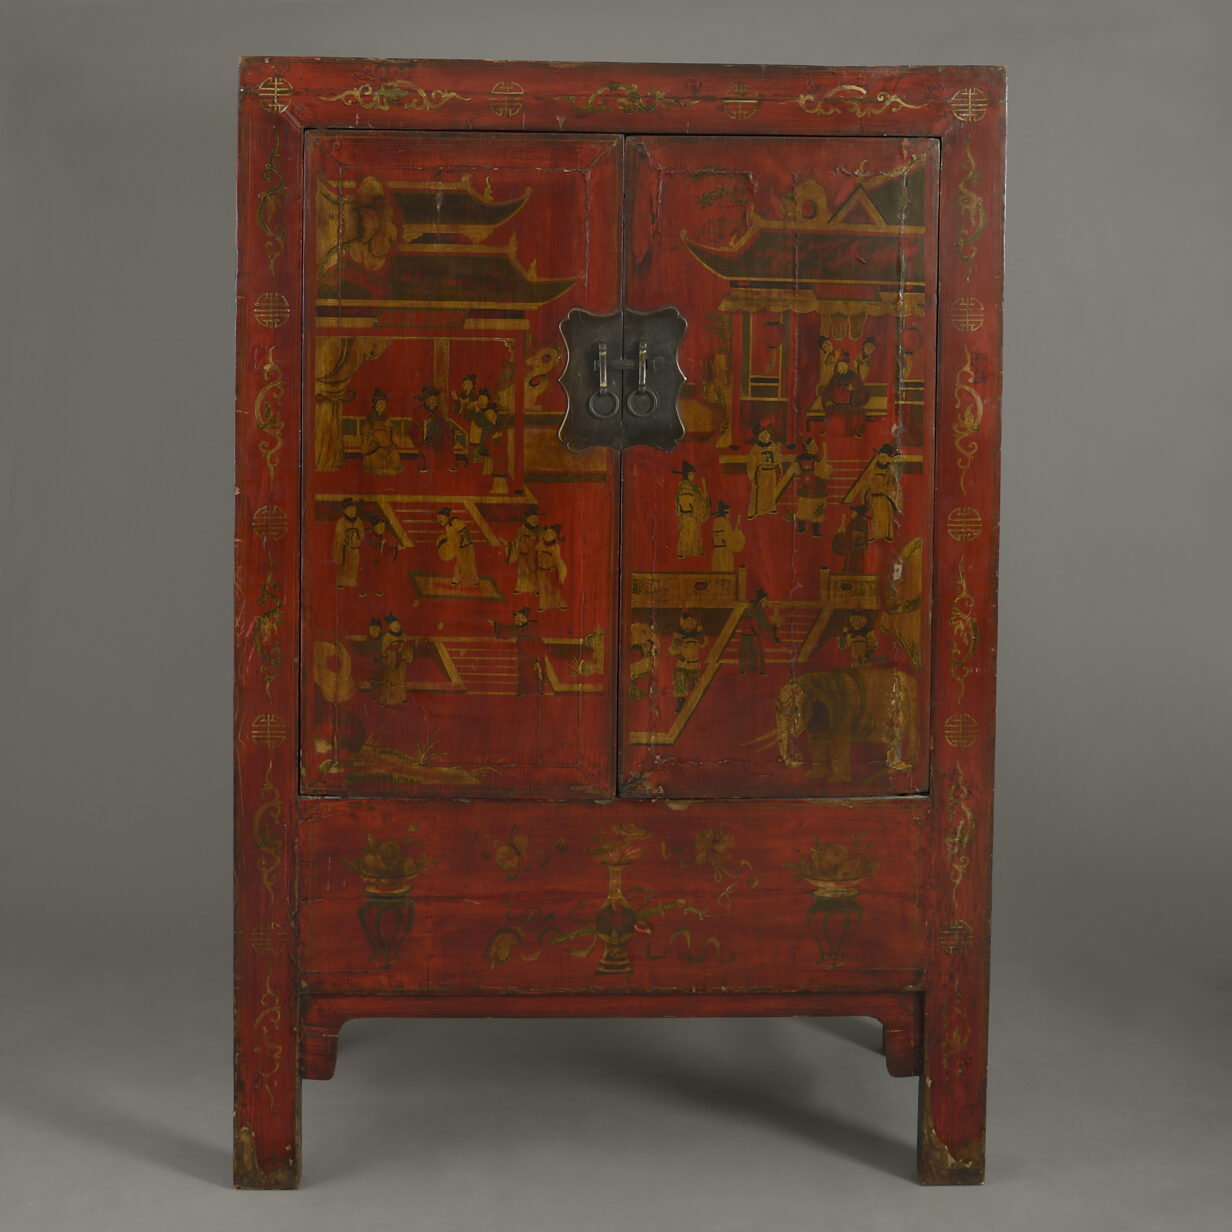 Tall chinese export red lacquer cabinet